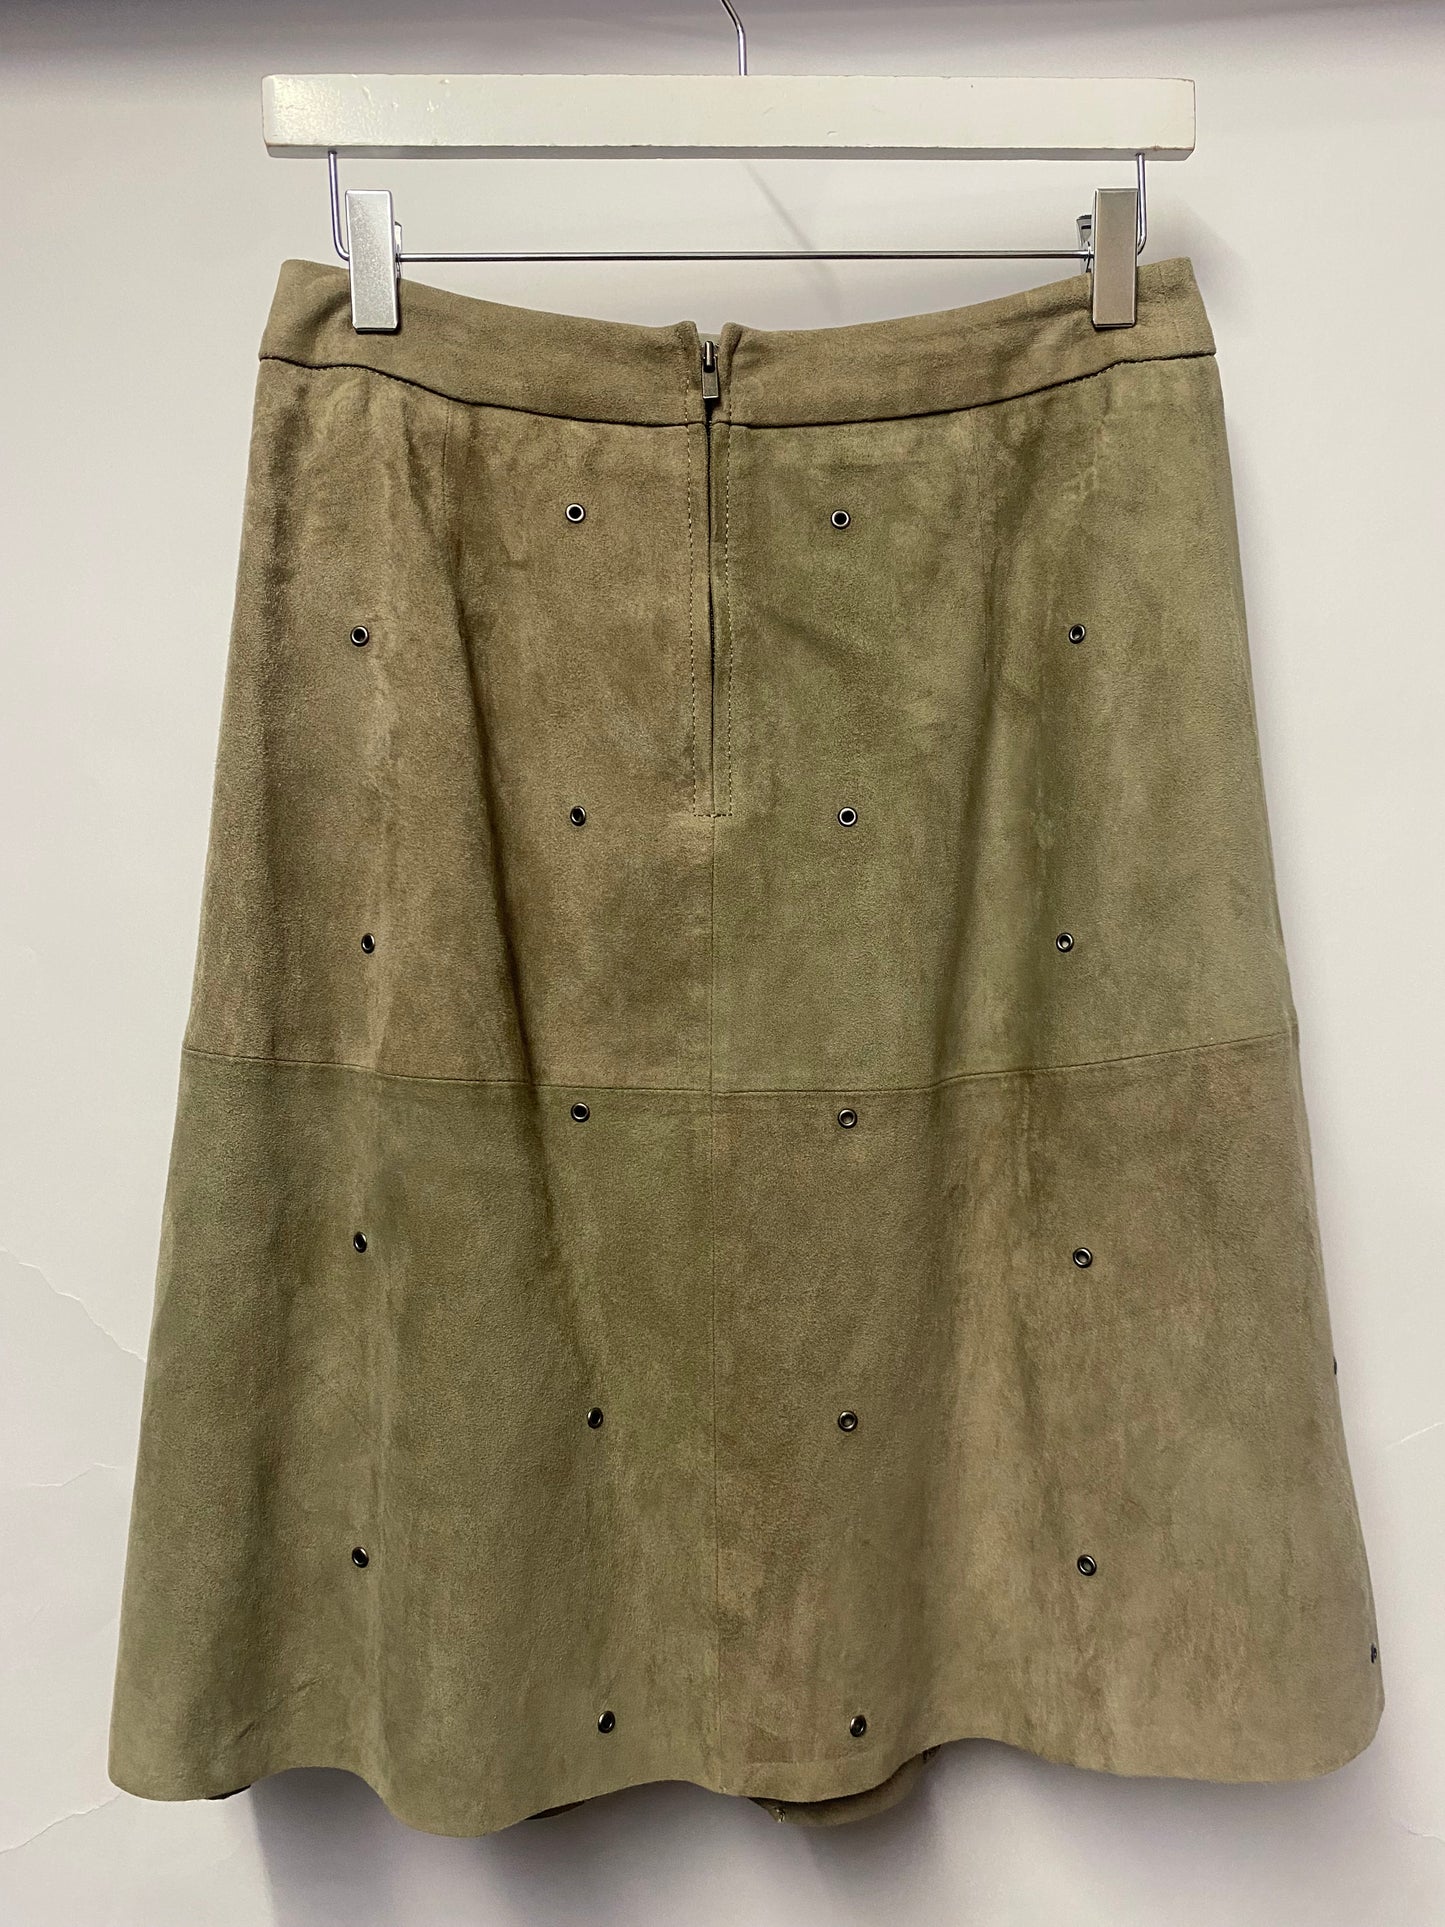 Banana Republic Stone Suede A-line Skirt with Eyelets 6